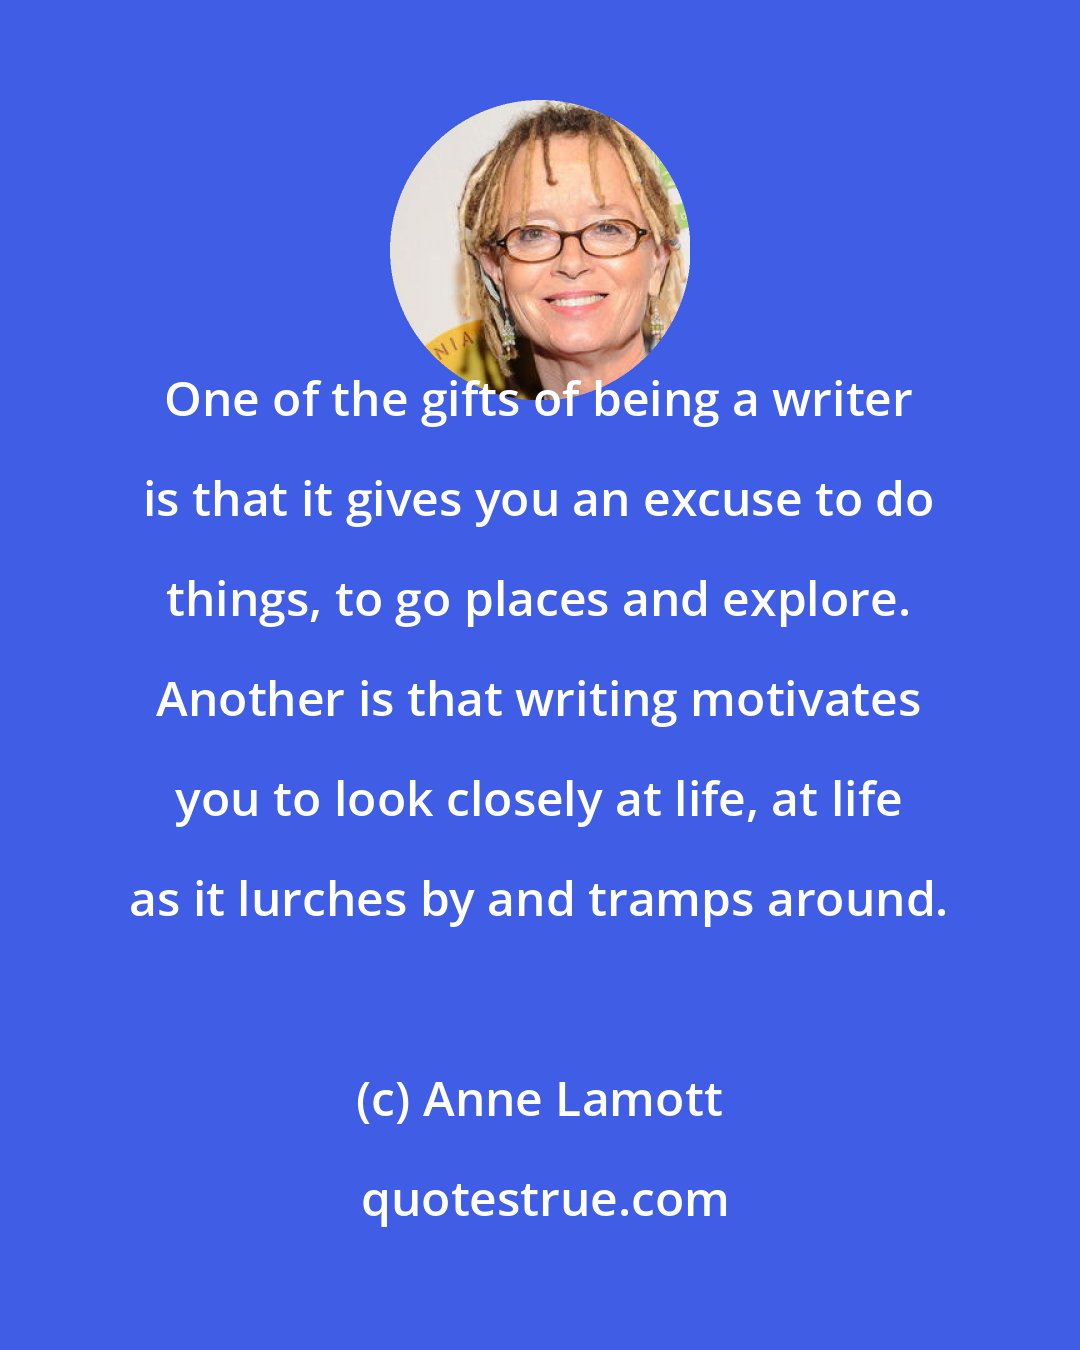 Anne Lamott: One of the gifts of being a writer is that it gives you an excuse to do things, to go places and explore. Another is that writing motivates you to look closely at life, at life as it lurches by and tramps around.